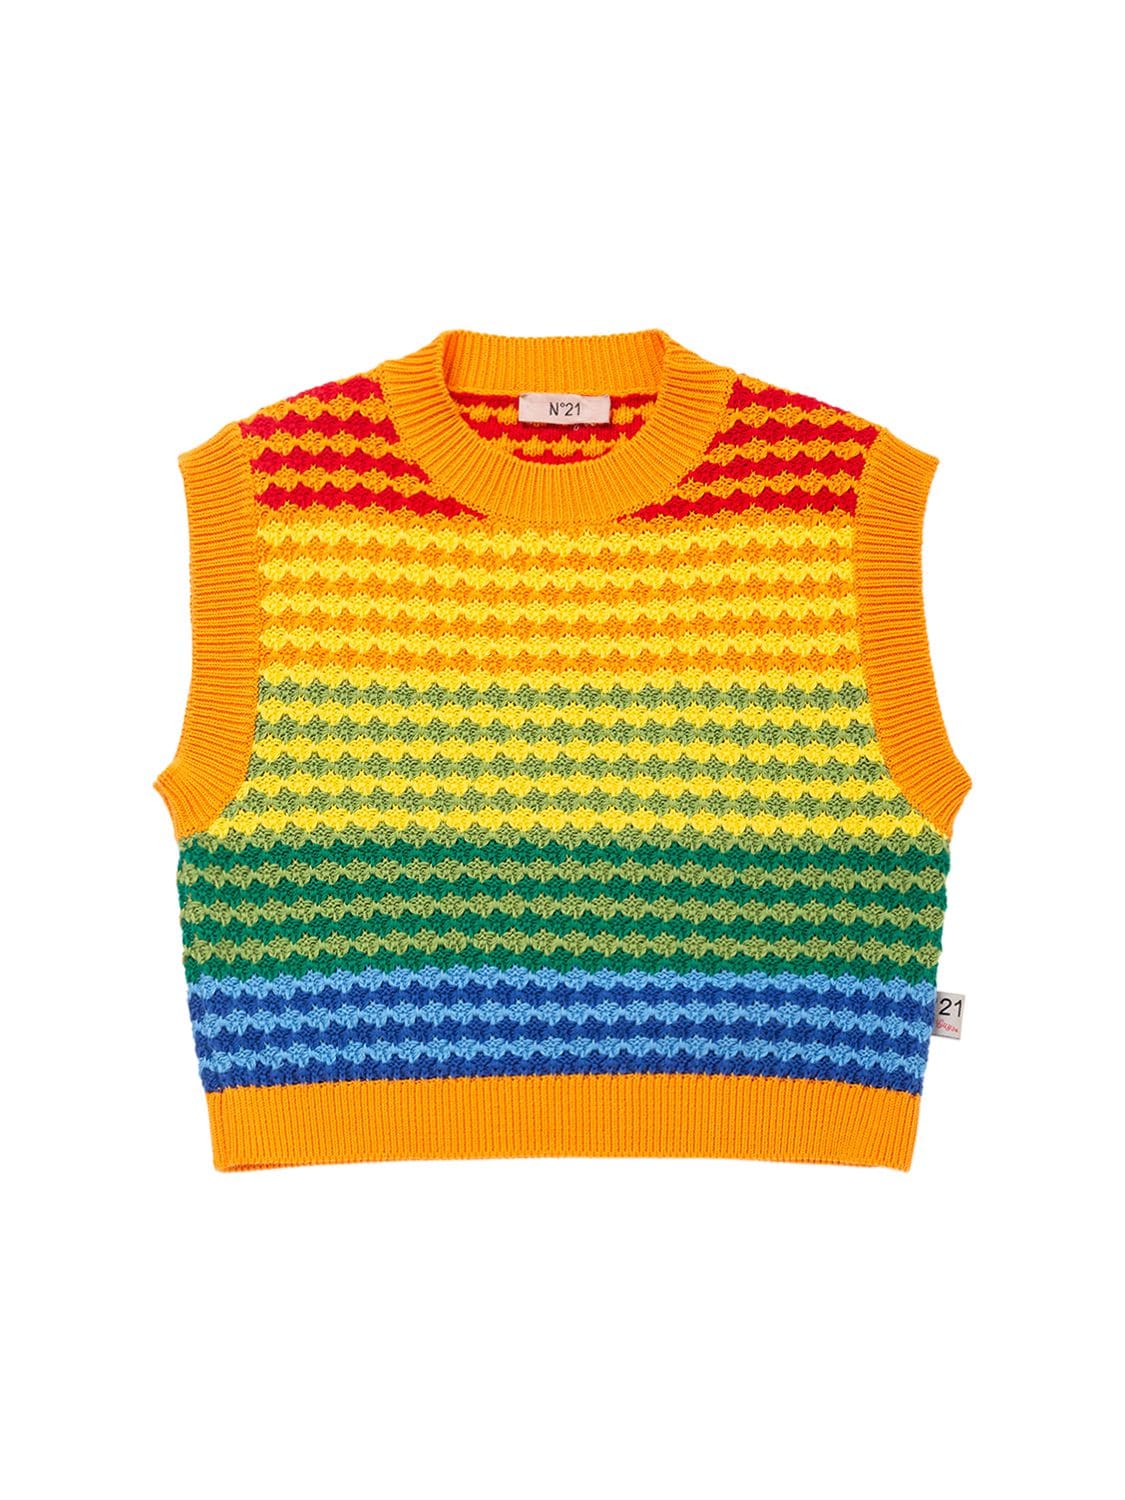 N°21 Kids' Sleeveless Cotton Tricot Knit Top In Multicolor